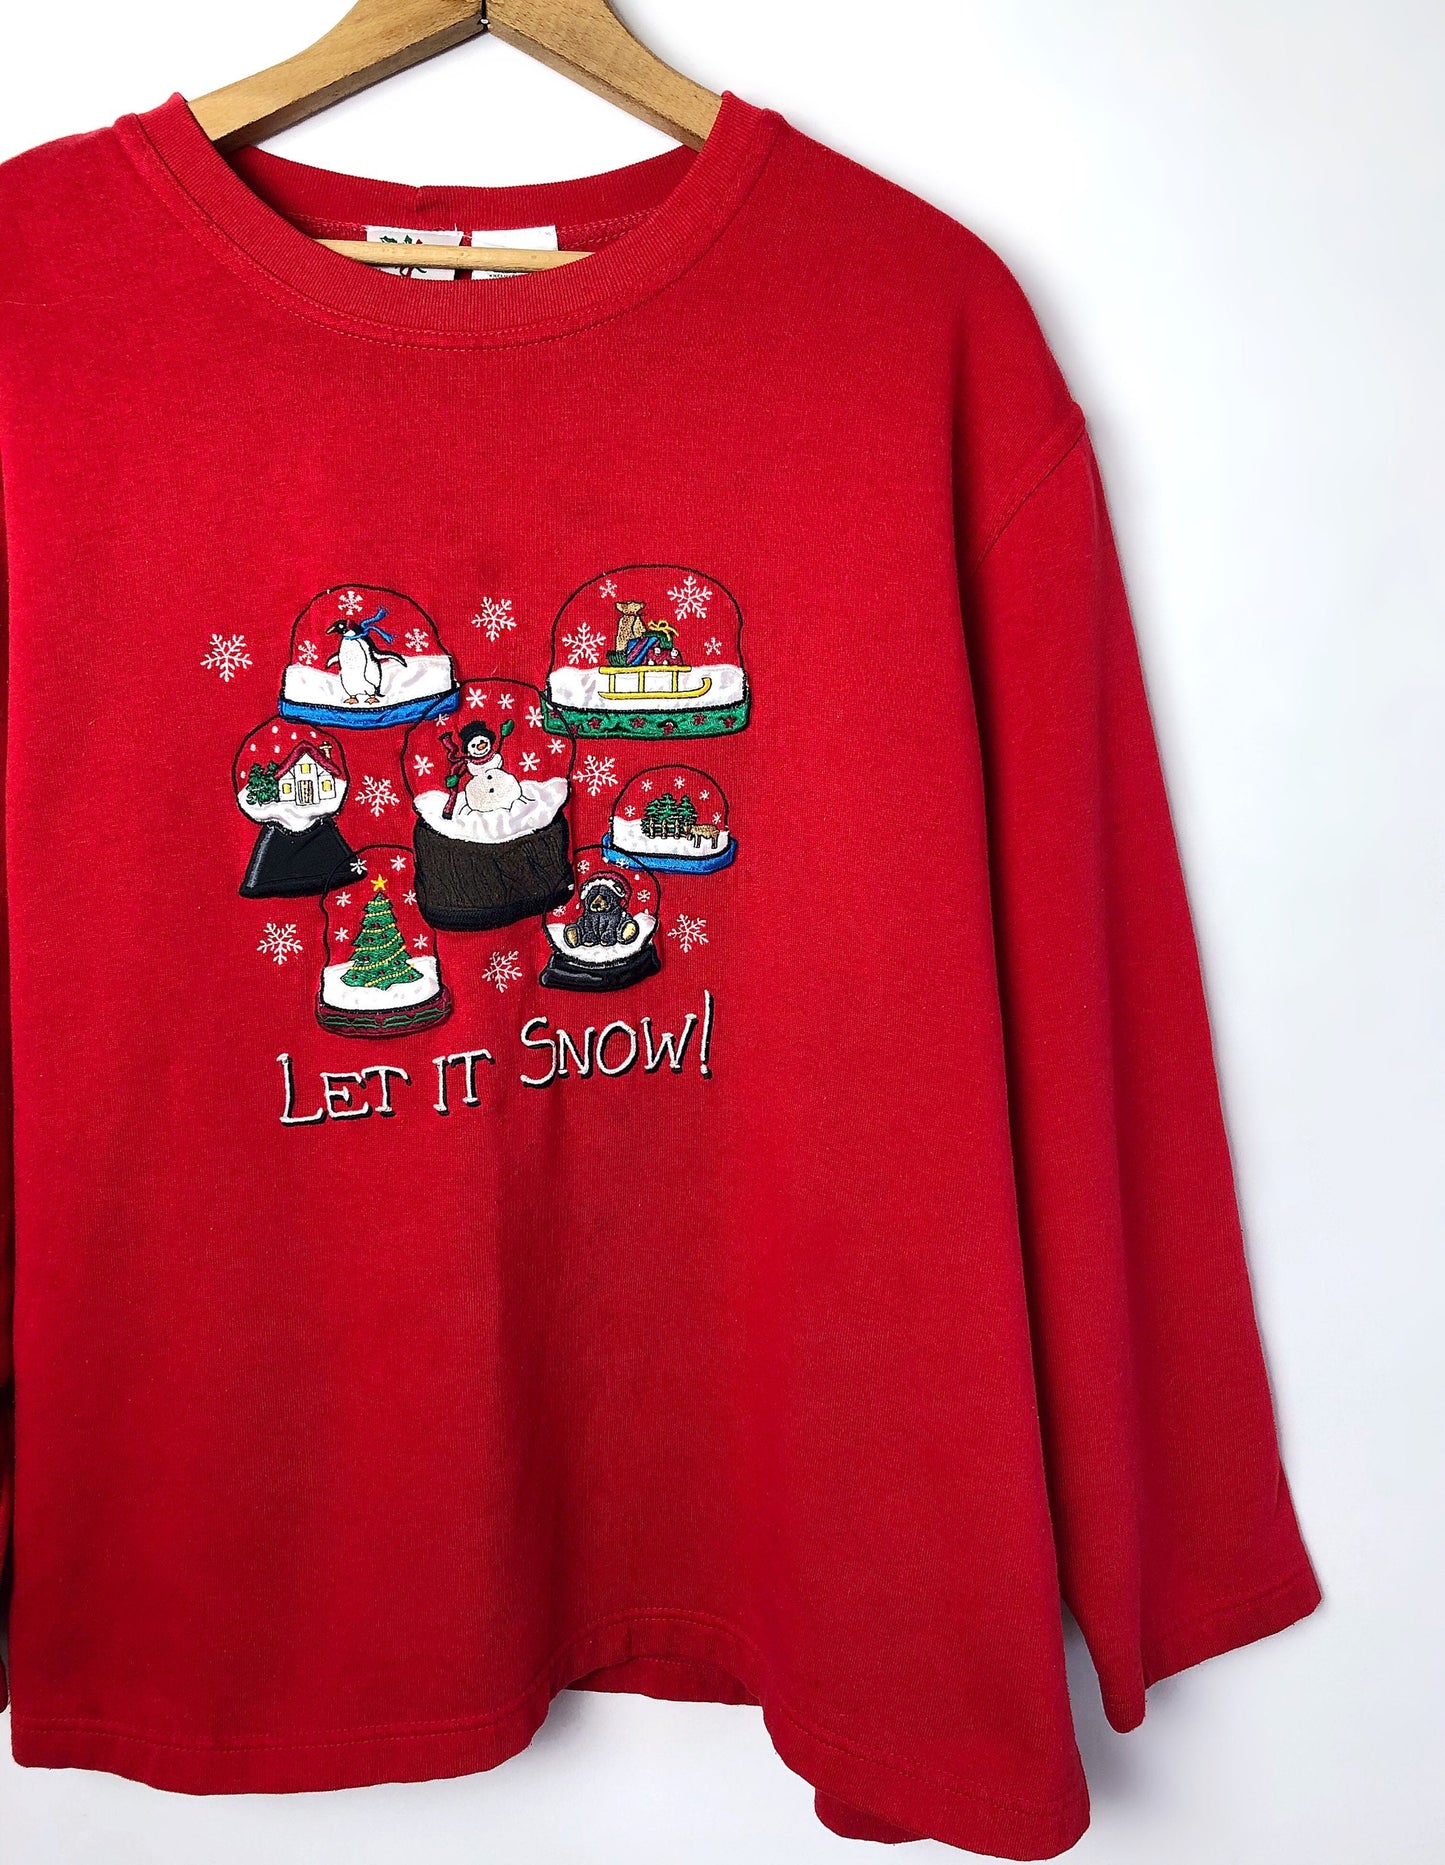 Vintage 90’s Snow Globe Let it SNOW Embroidered Ugly Holiday Sweatshirt Plus Size 2X